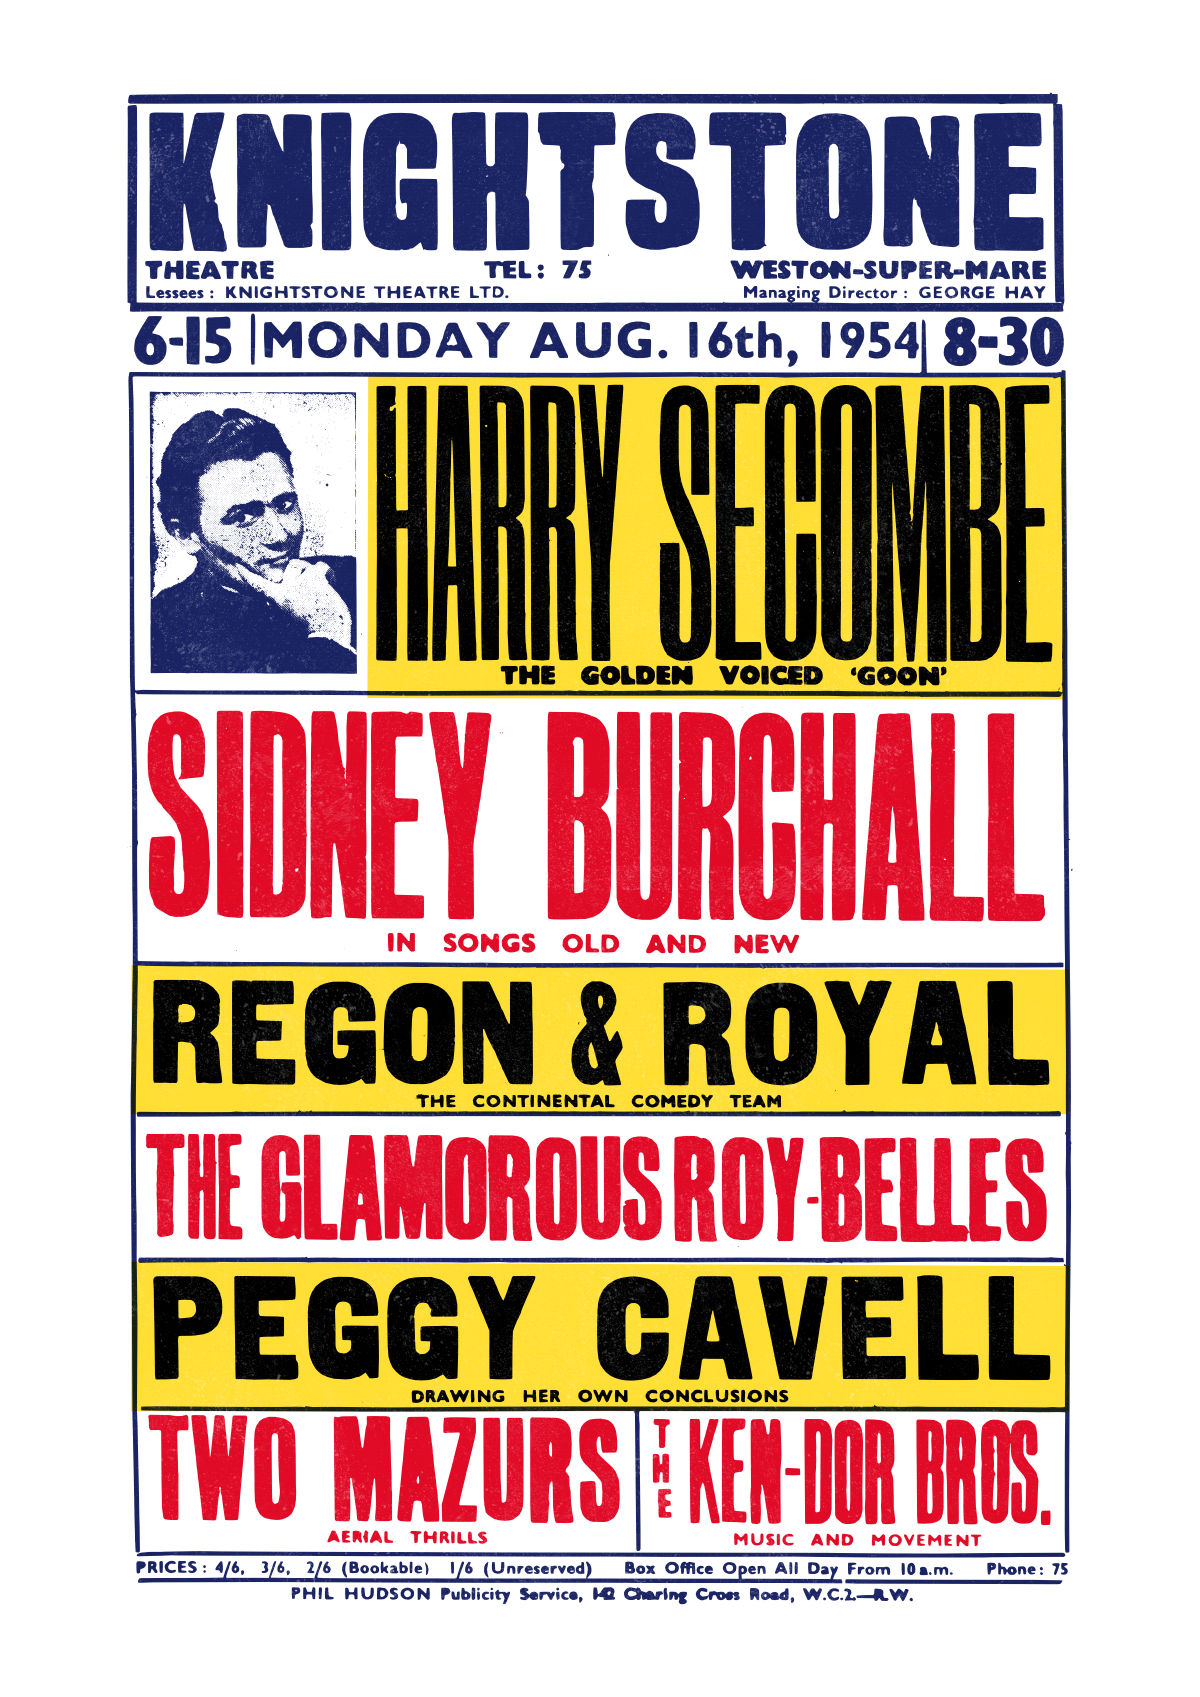 Harry Secombe poster artwork